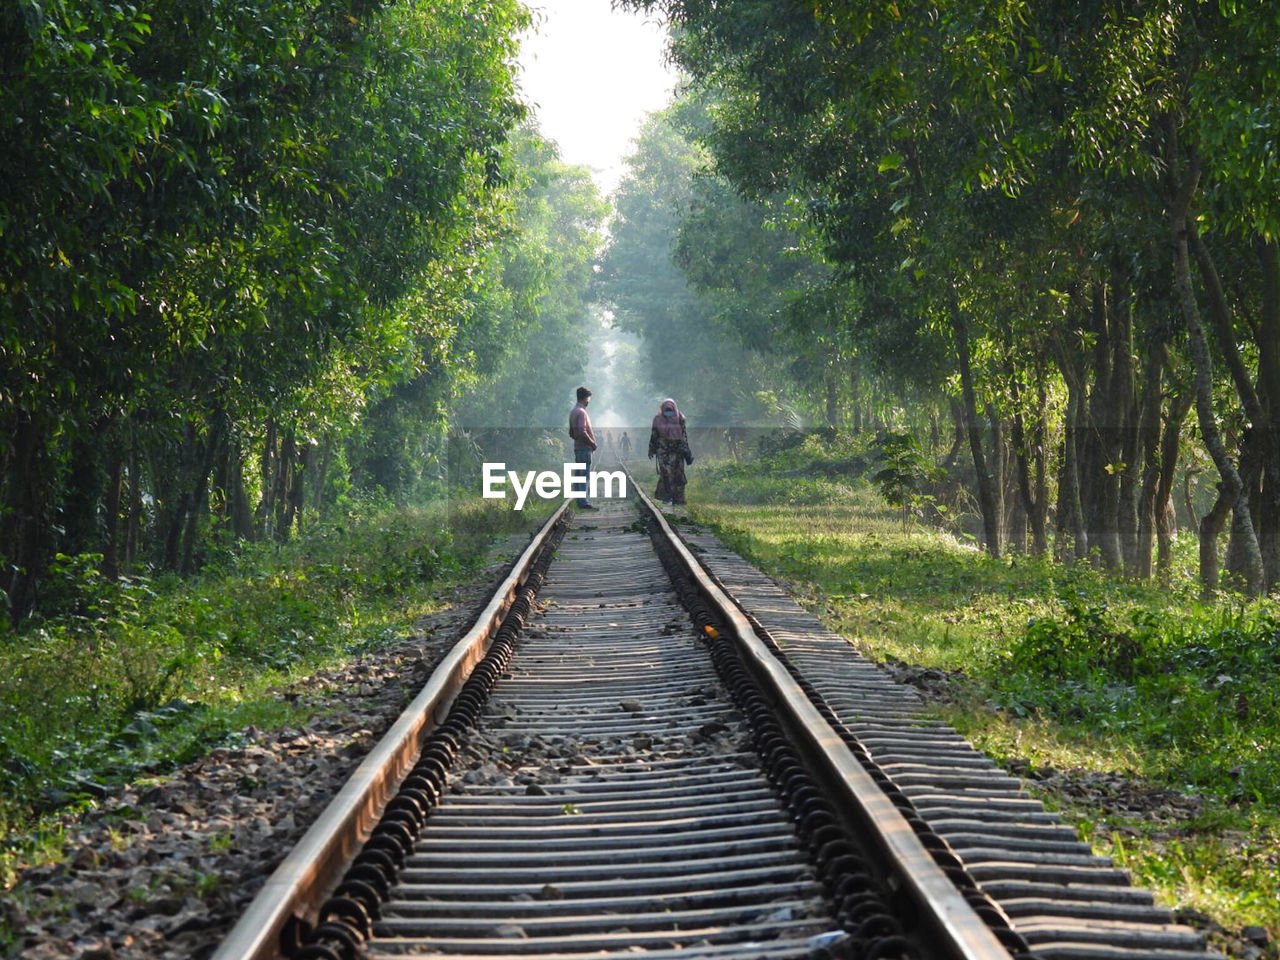  view of people walking on railroad track amidst trees